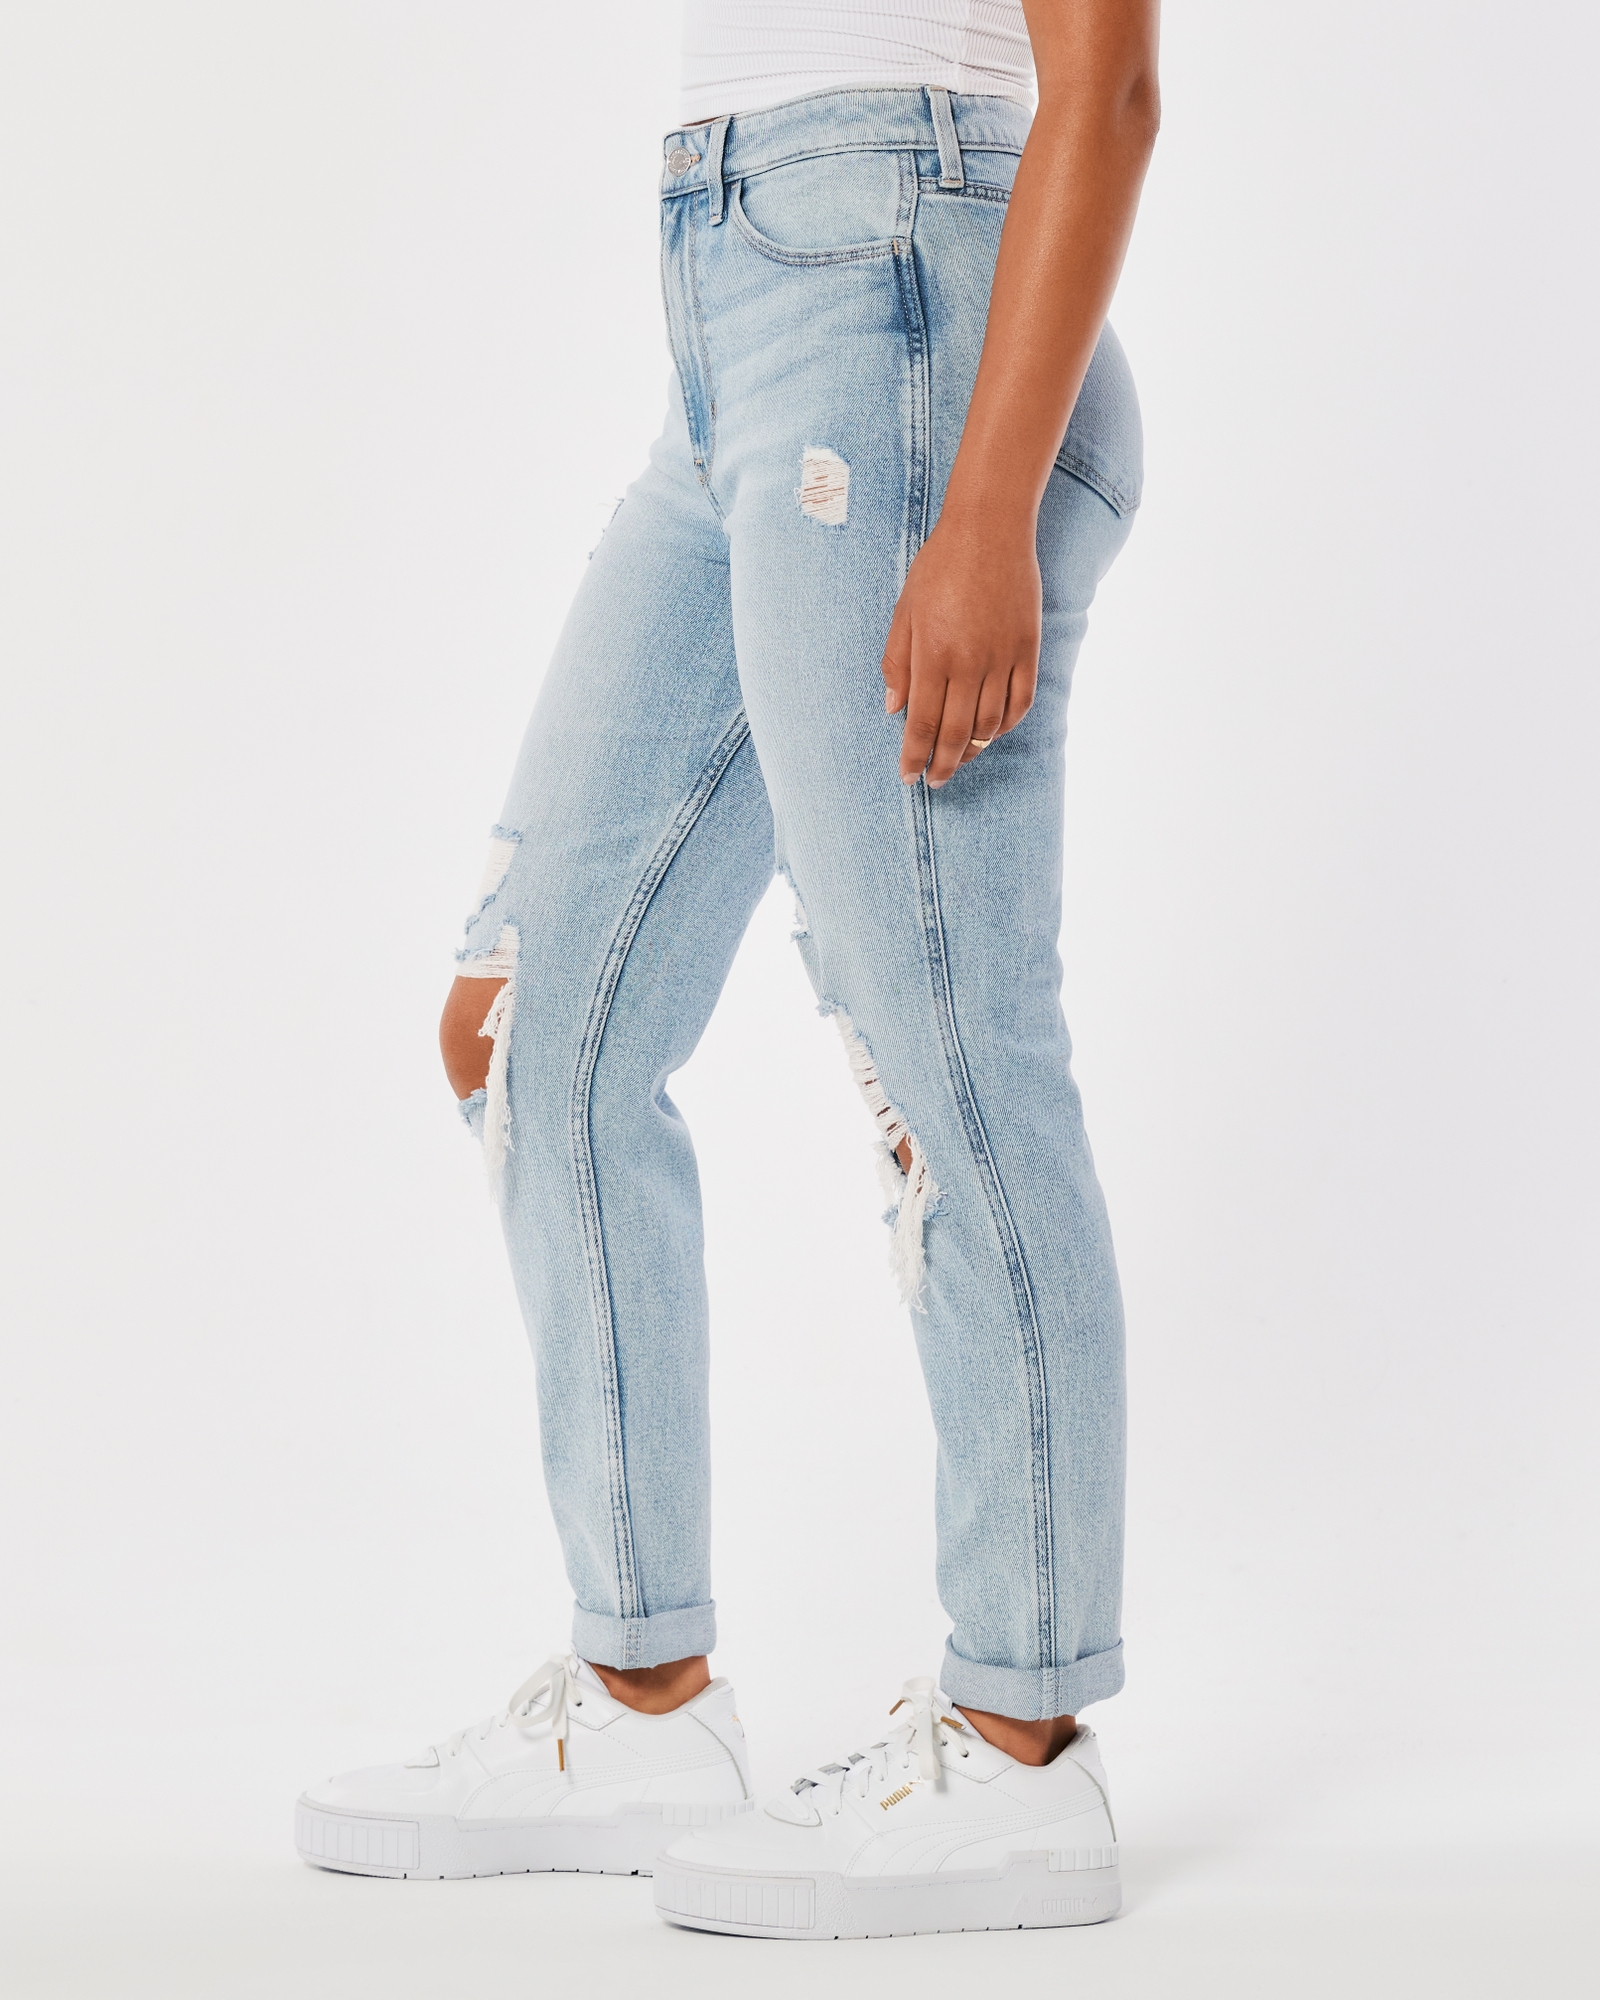 https://img.hollisterco.com/is/image/anf/KIC_355-2102-6327-281_model3.jpg?policy=product-extra-large